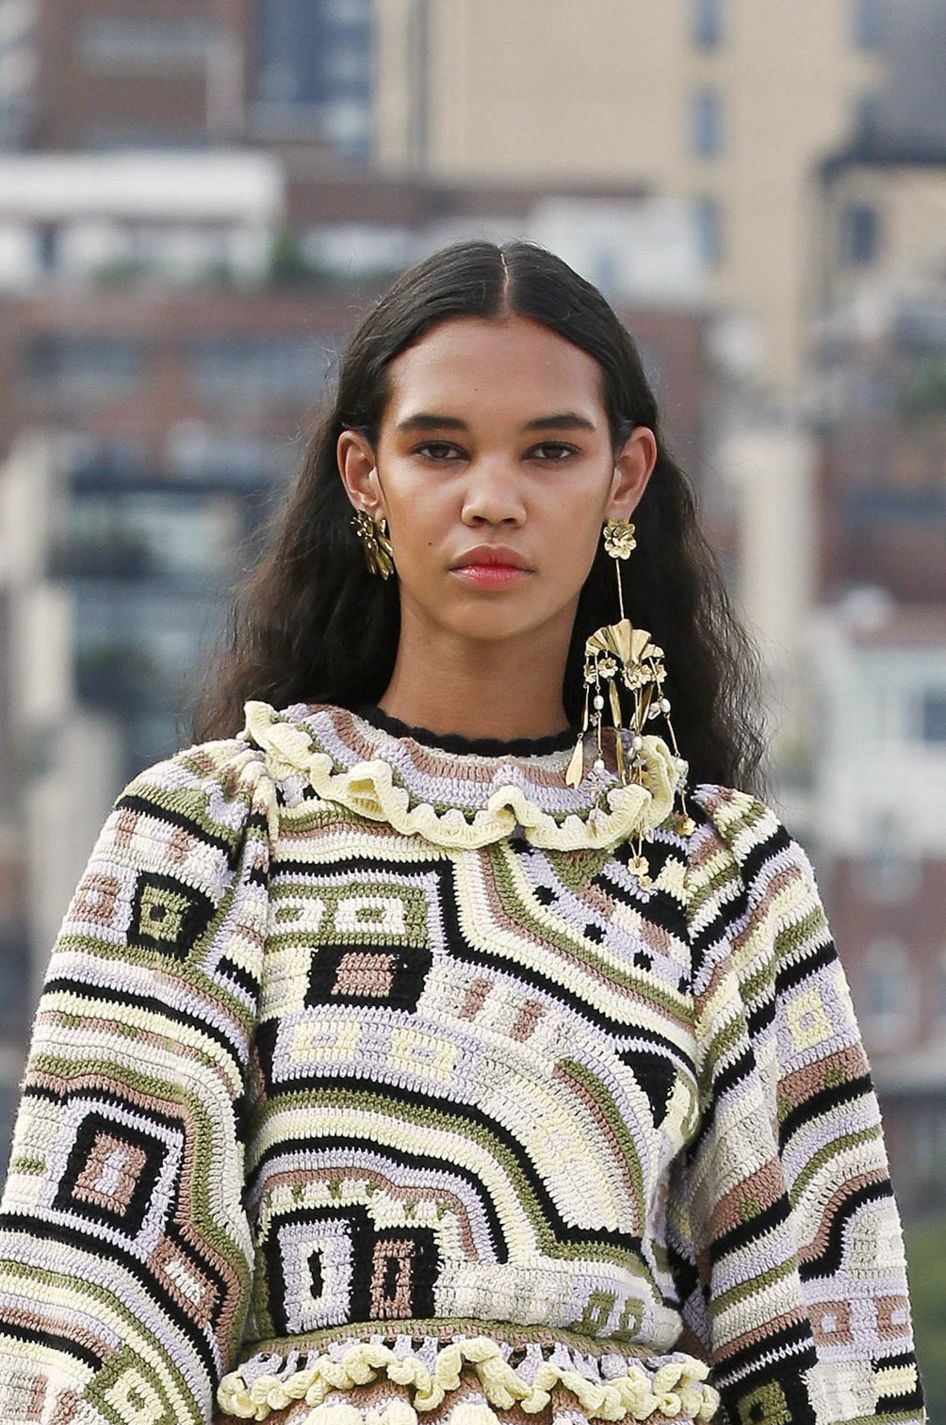 10 Jewellery Trends That Will Seriously Up Your Accessories Game in Spring  2021 - JTL Blog